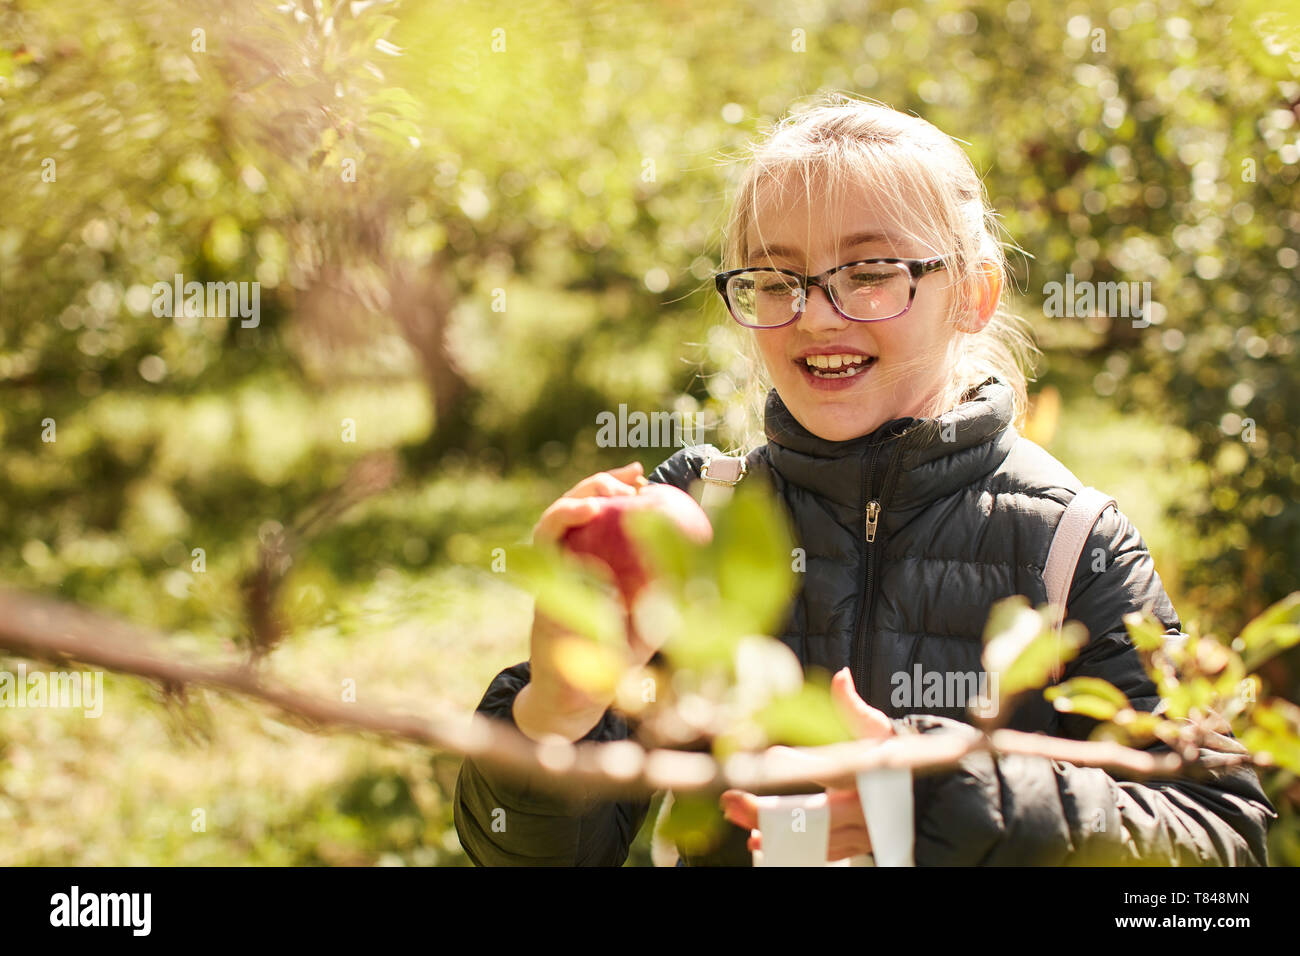 Girl picking apples from tree Stock Photo